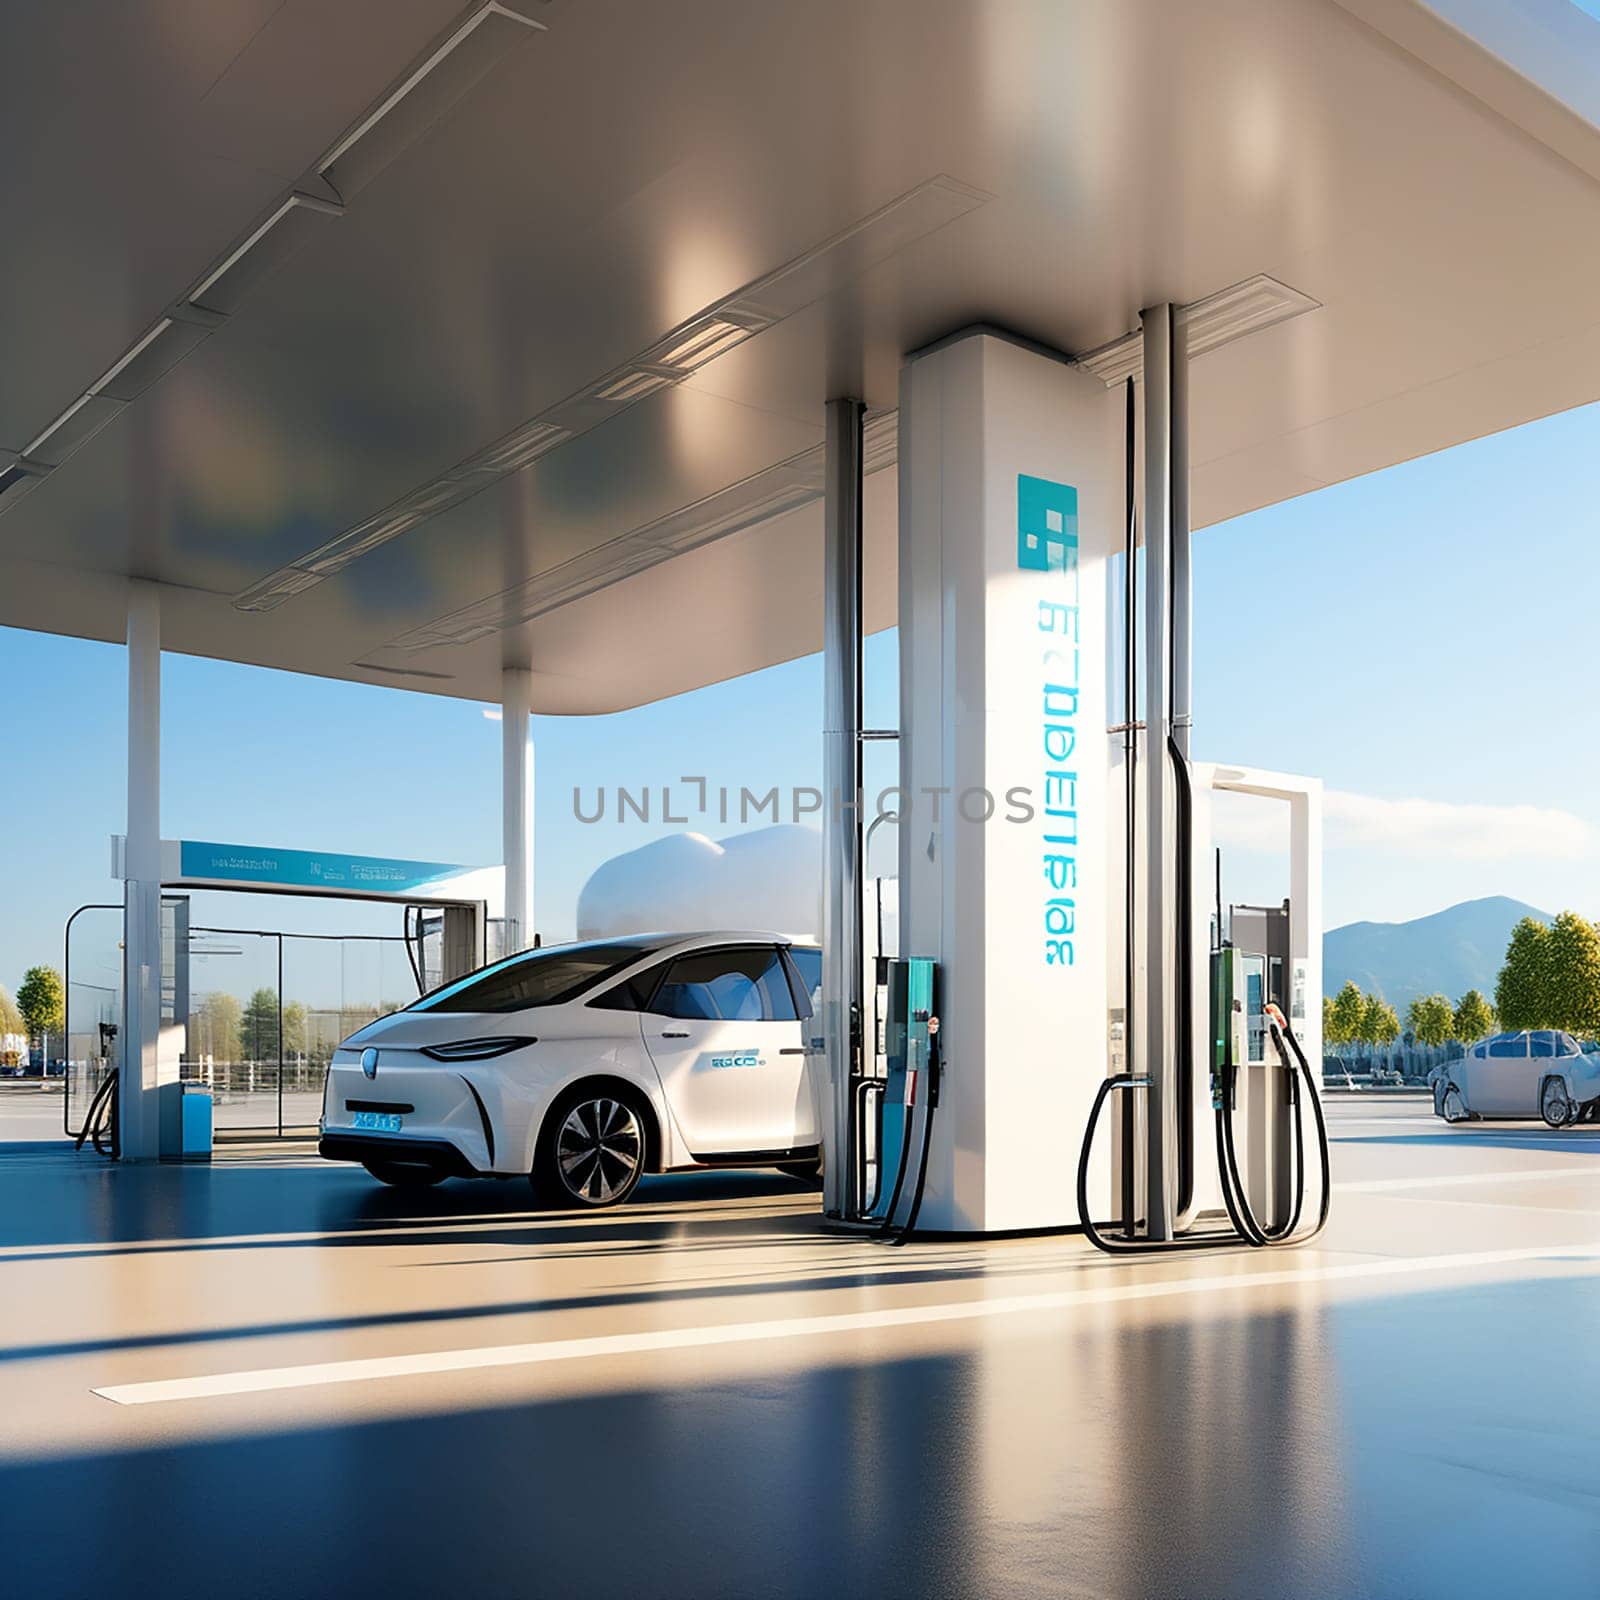 Green Refueling: Enabling Clean Energy with Hydrogen Filling Stations by Petrichor